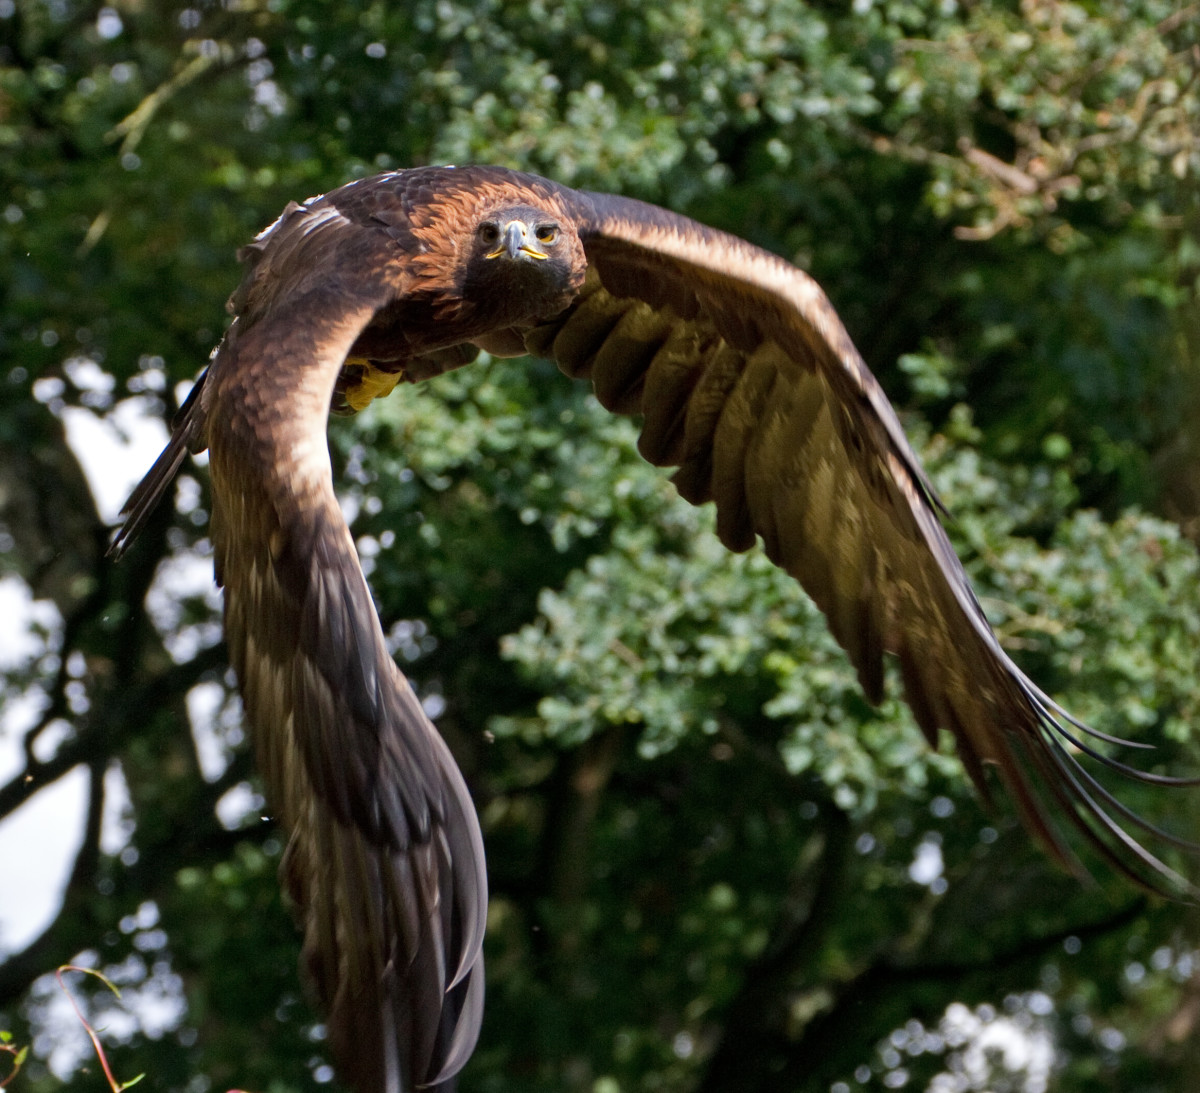 Stunning photo of the Golden Eagle with its amazing wingspan.